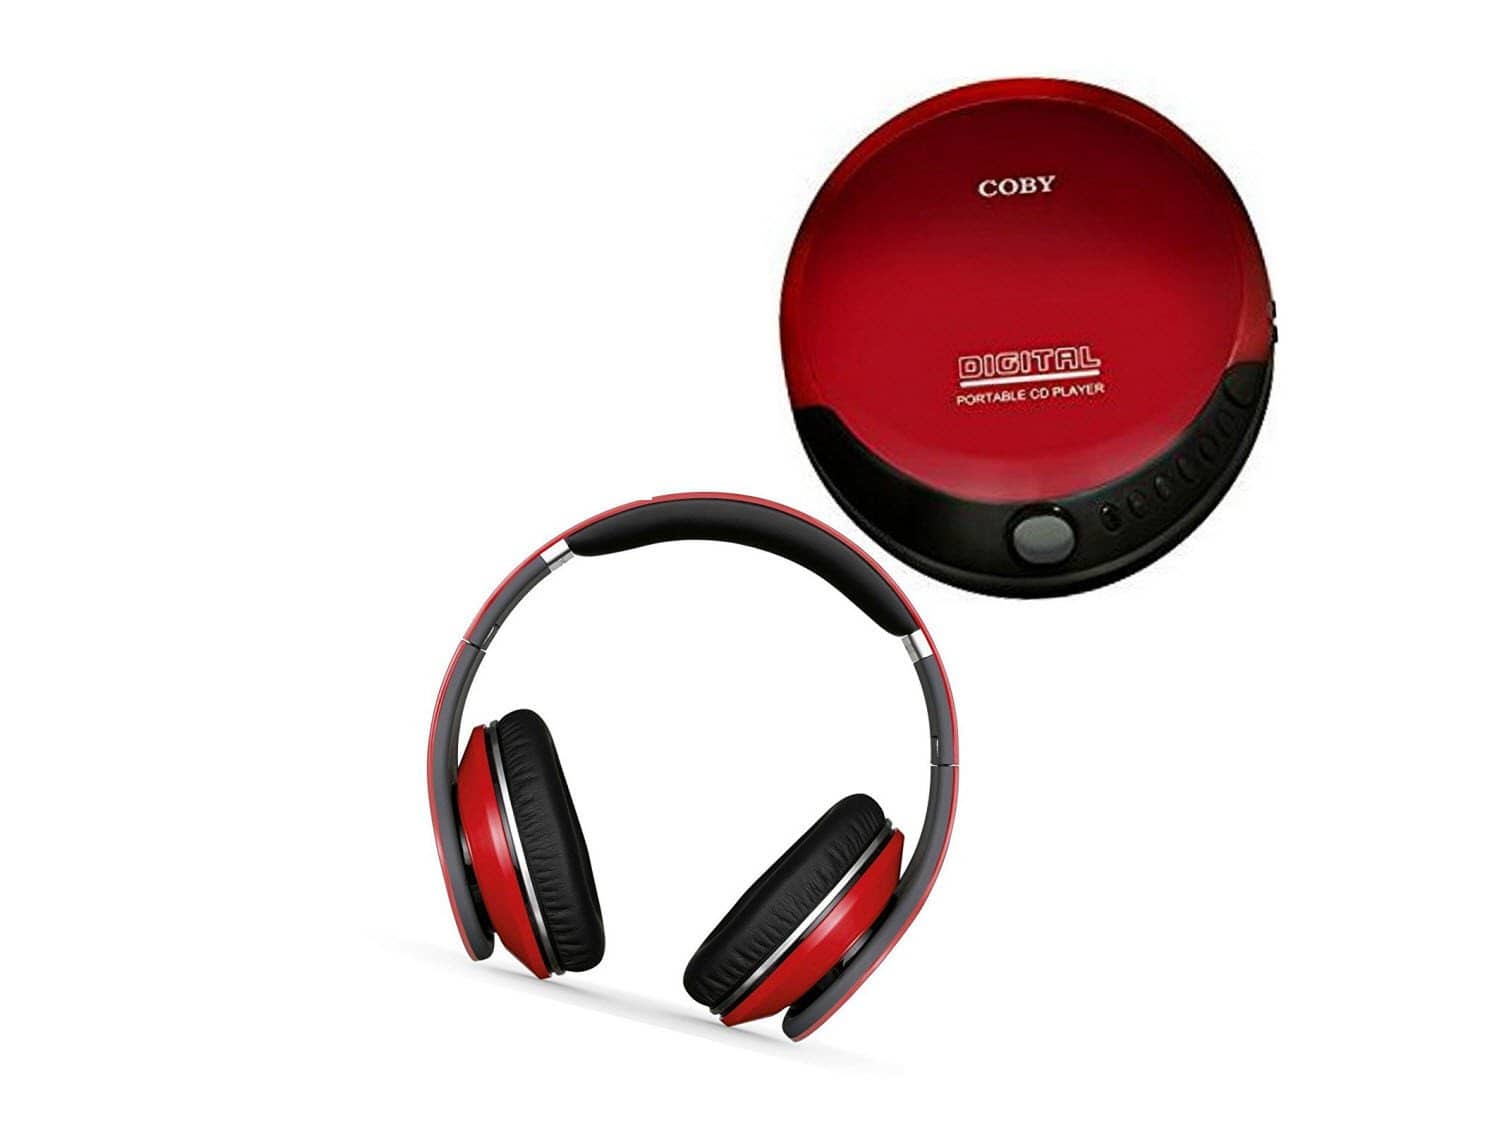 Coby Portable Compact CD Player Headphones - Red